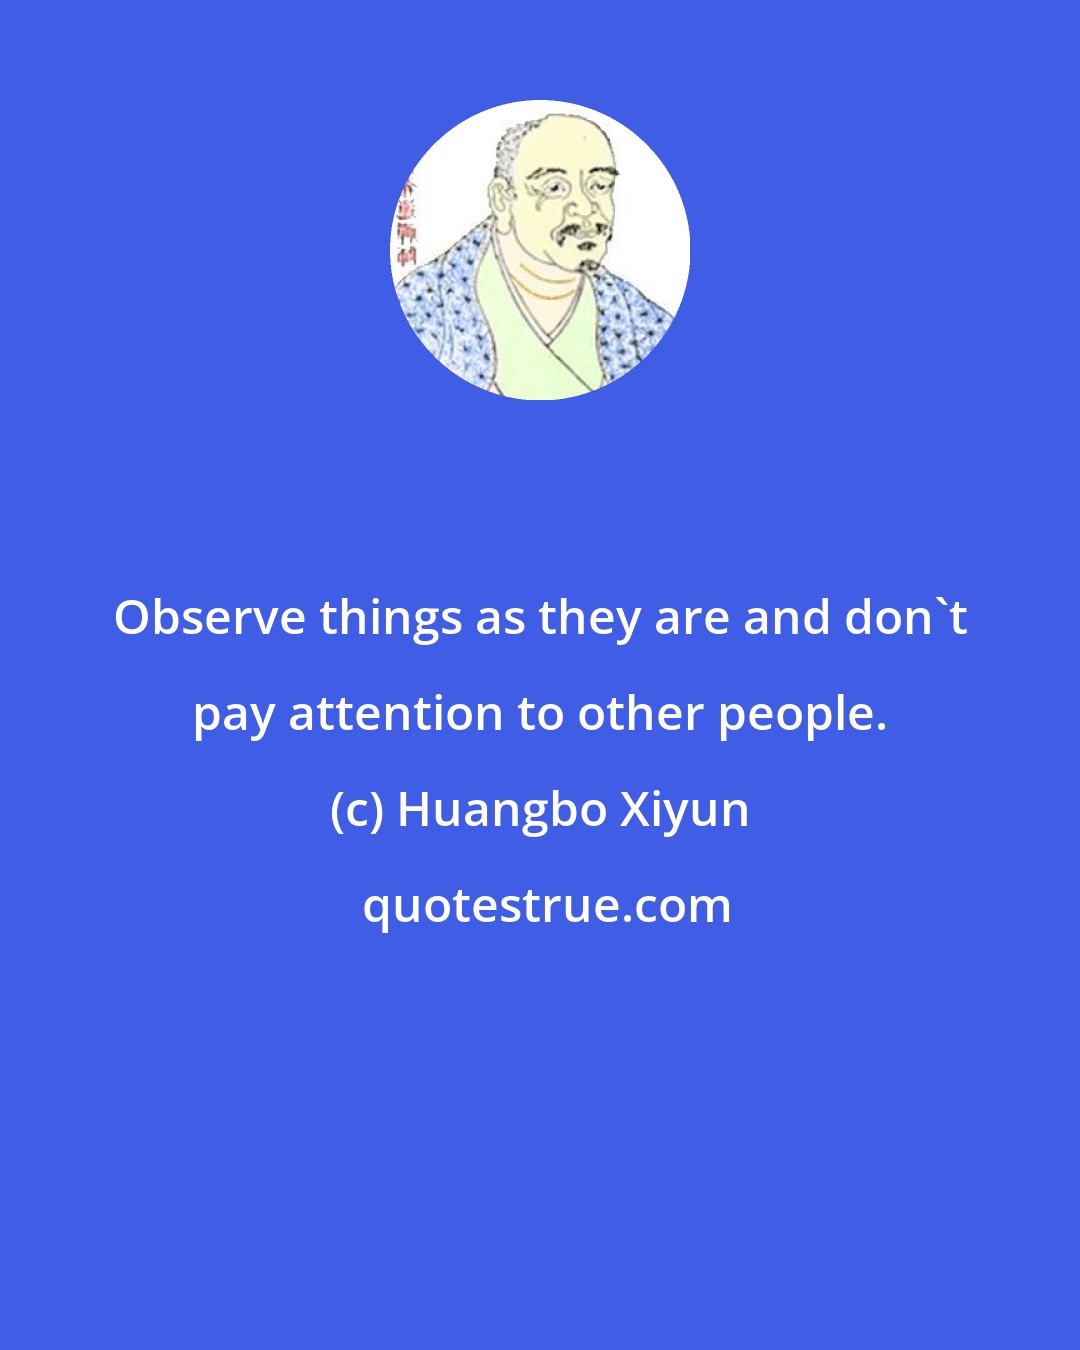 Huangbo Xiyun: Observe things as they are and don't pay attention to other people.